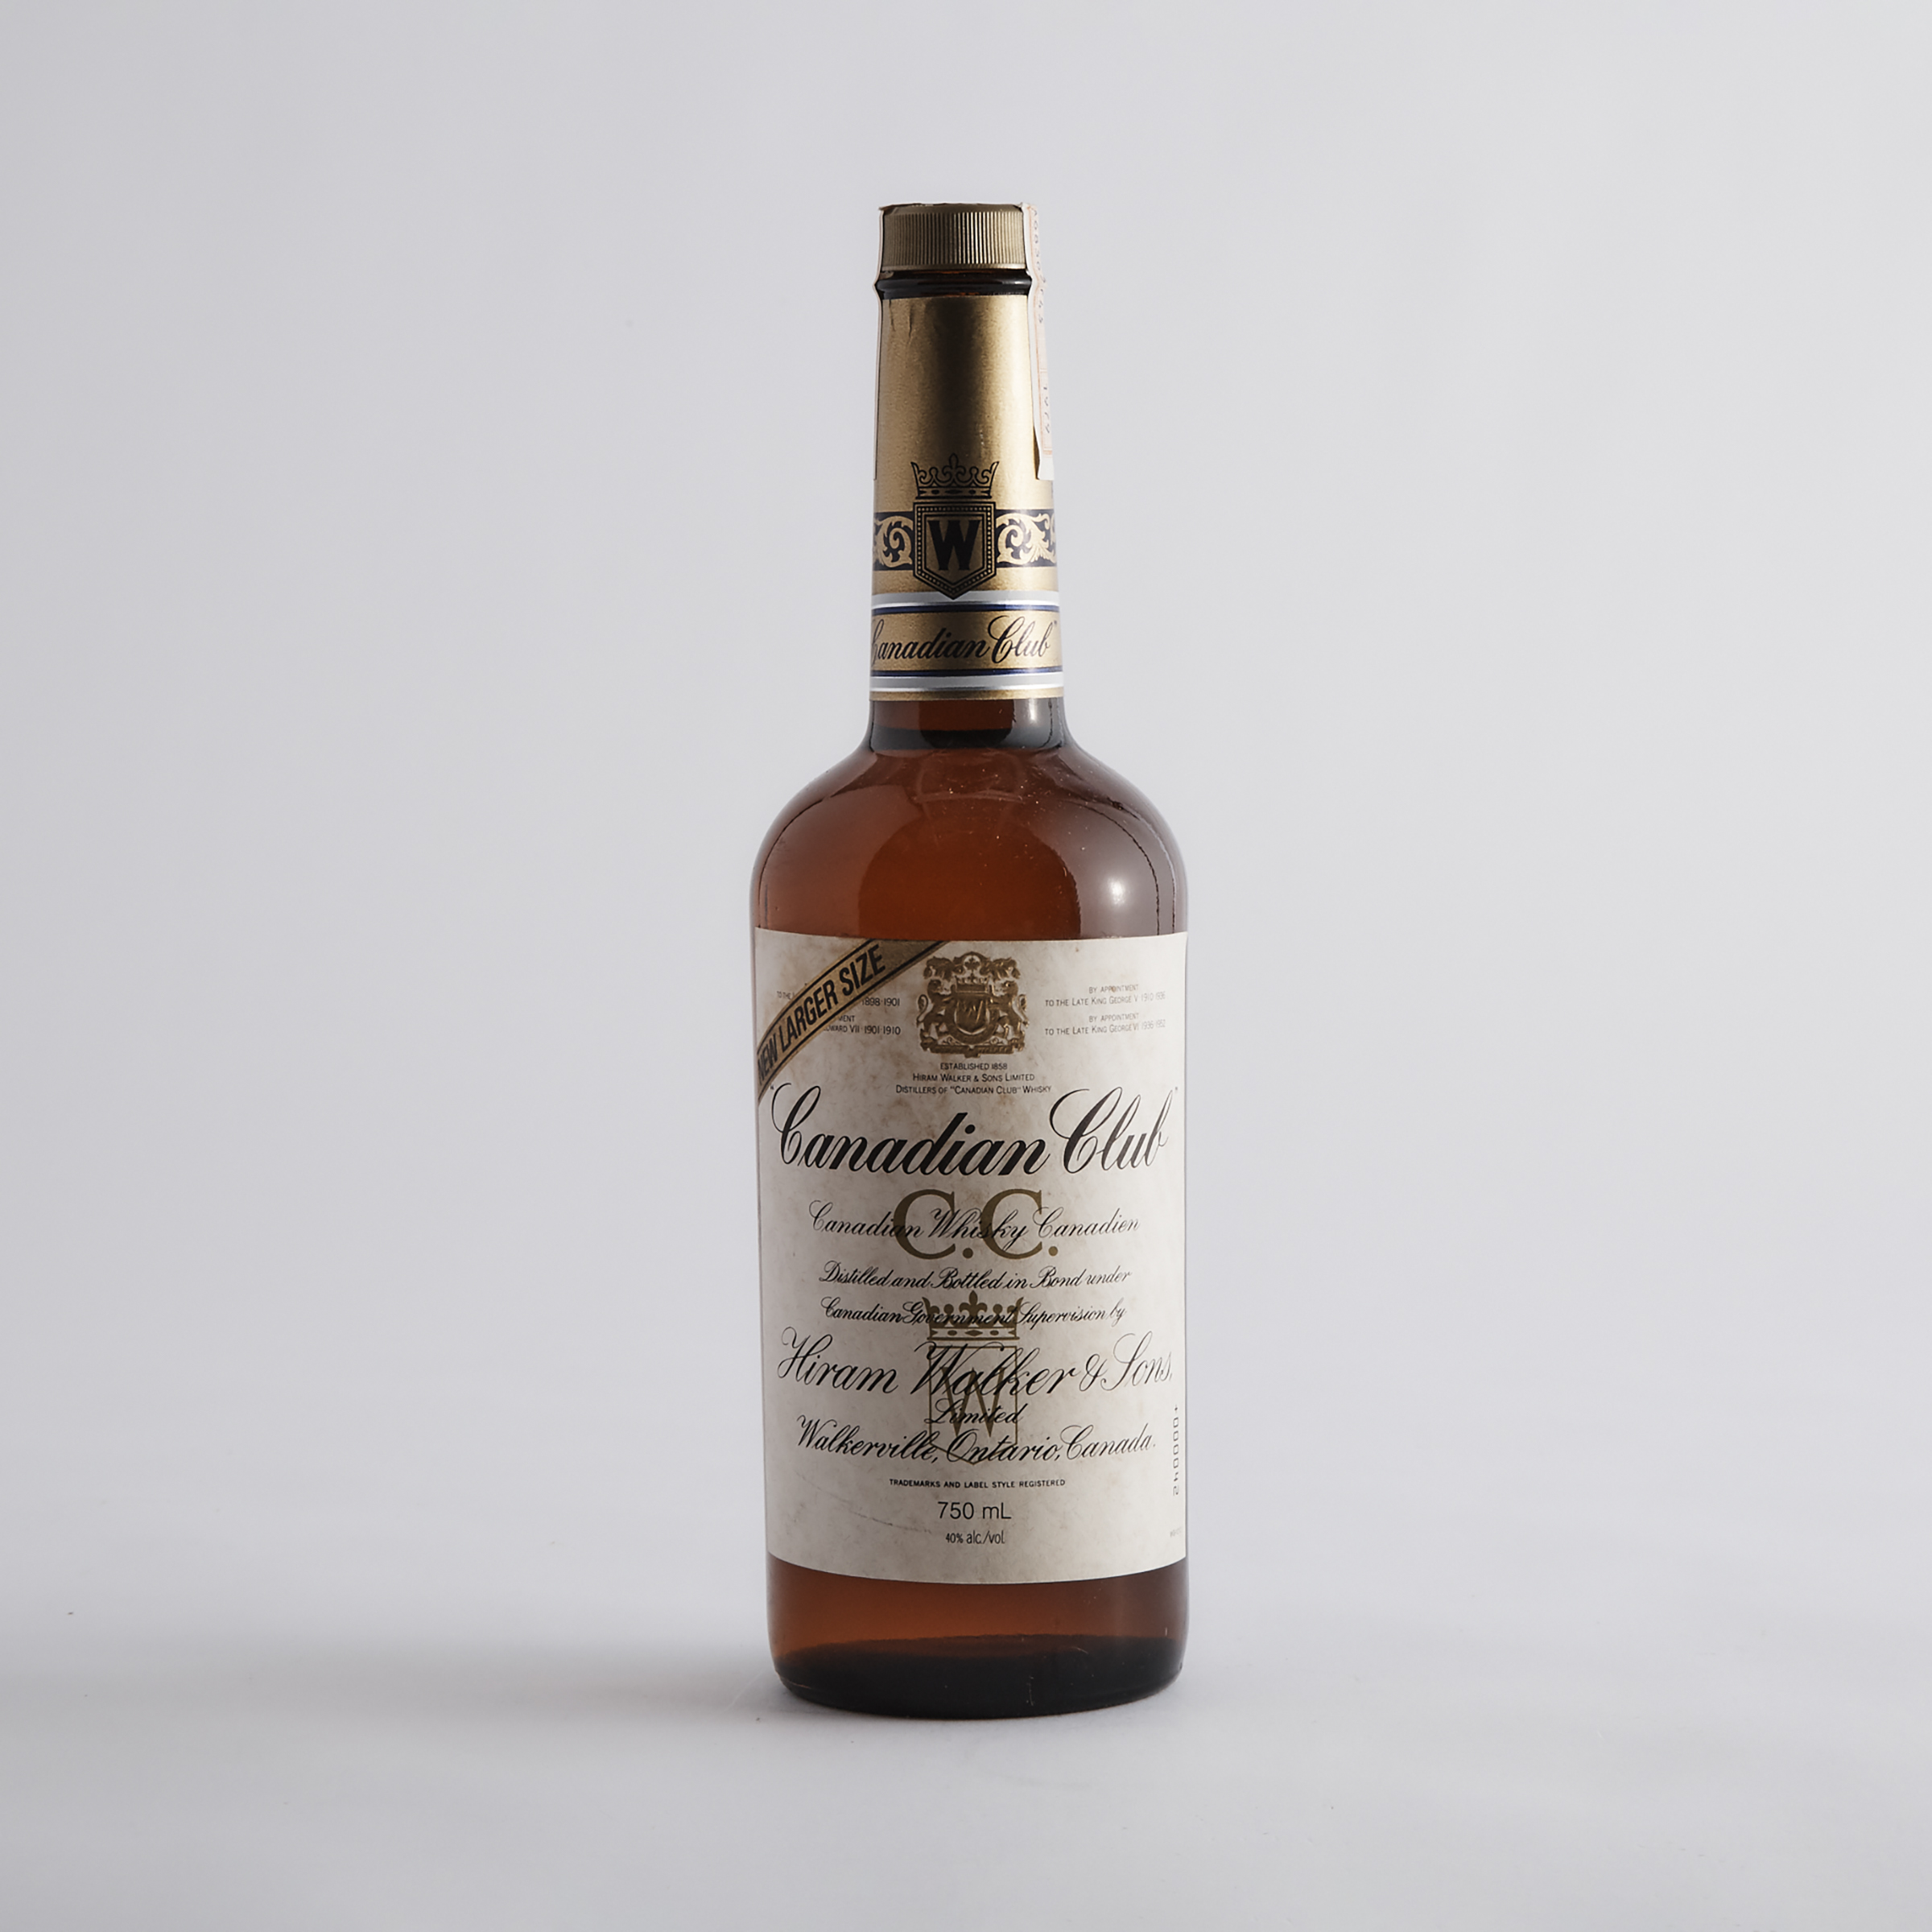 CANADIAN CLUB CANADIAN WHISKY (ONE 750 ML)